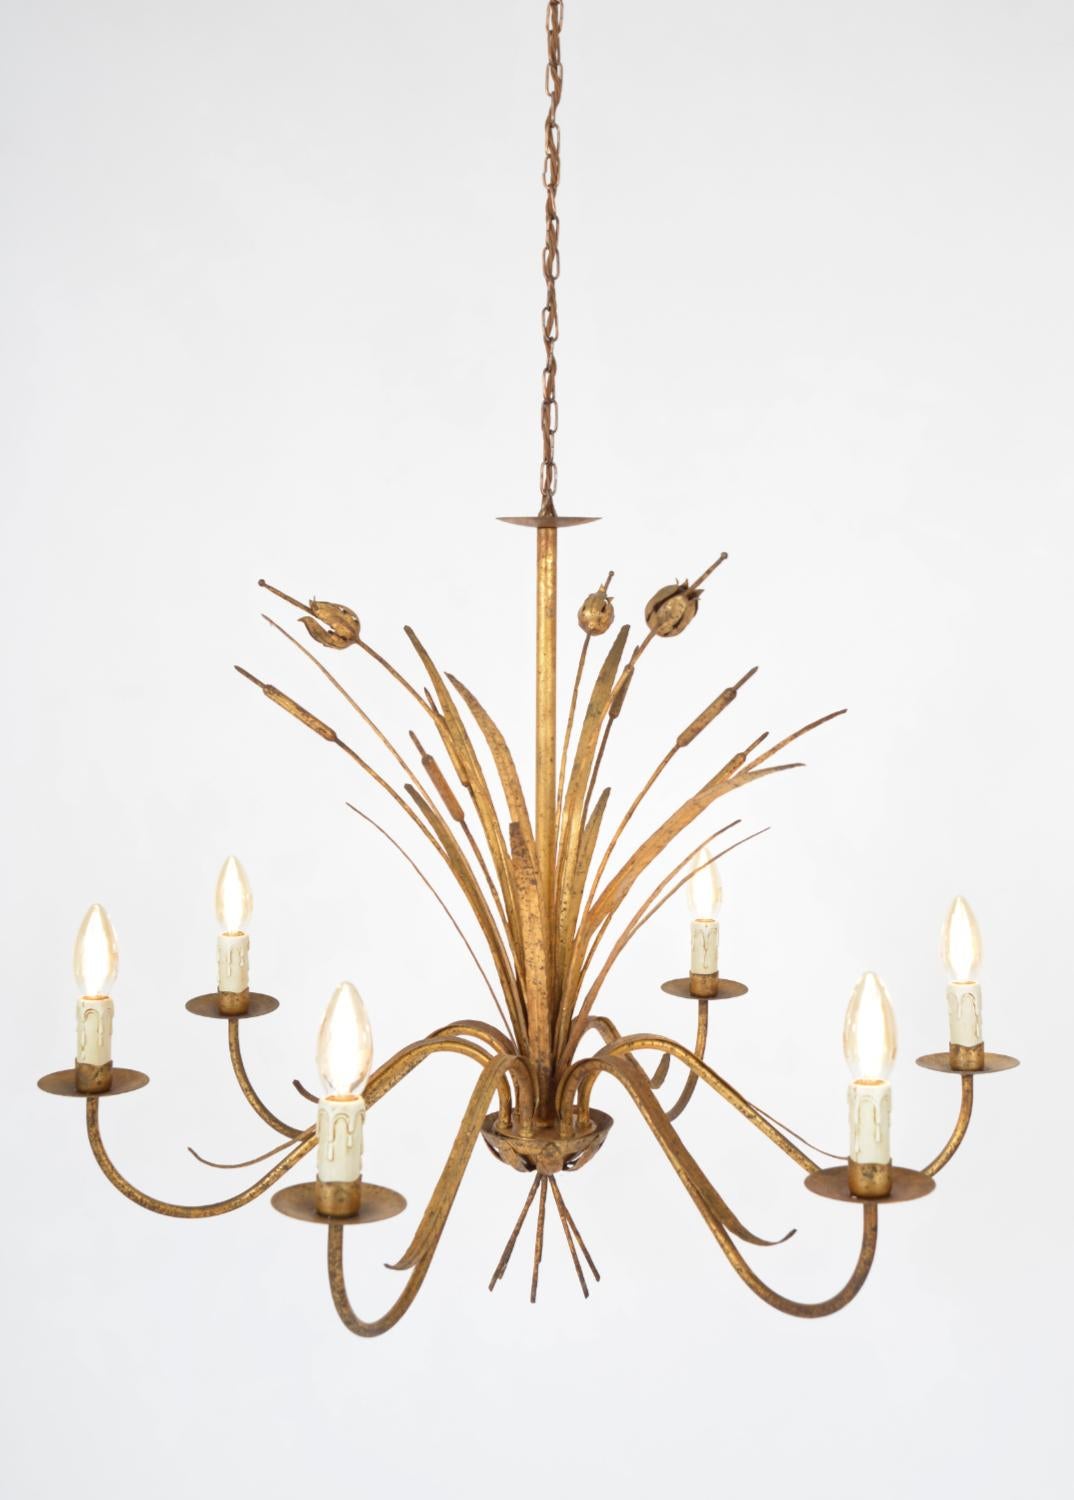 20th Century Spanish Gilt Metal Toleware Bulrush Chandelier Hollywood Regency  In Good Condition For Sale In Sherborne, Dorset